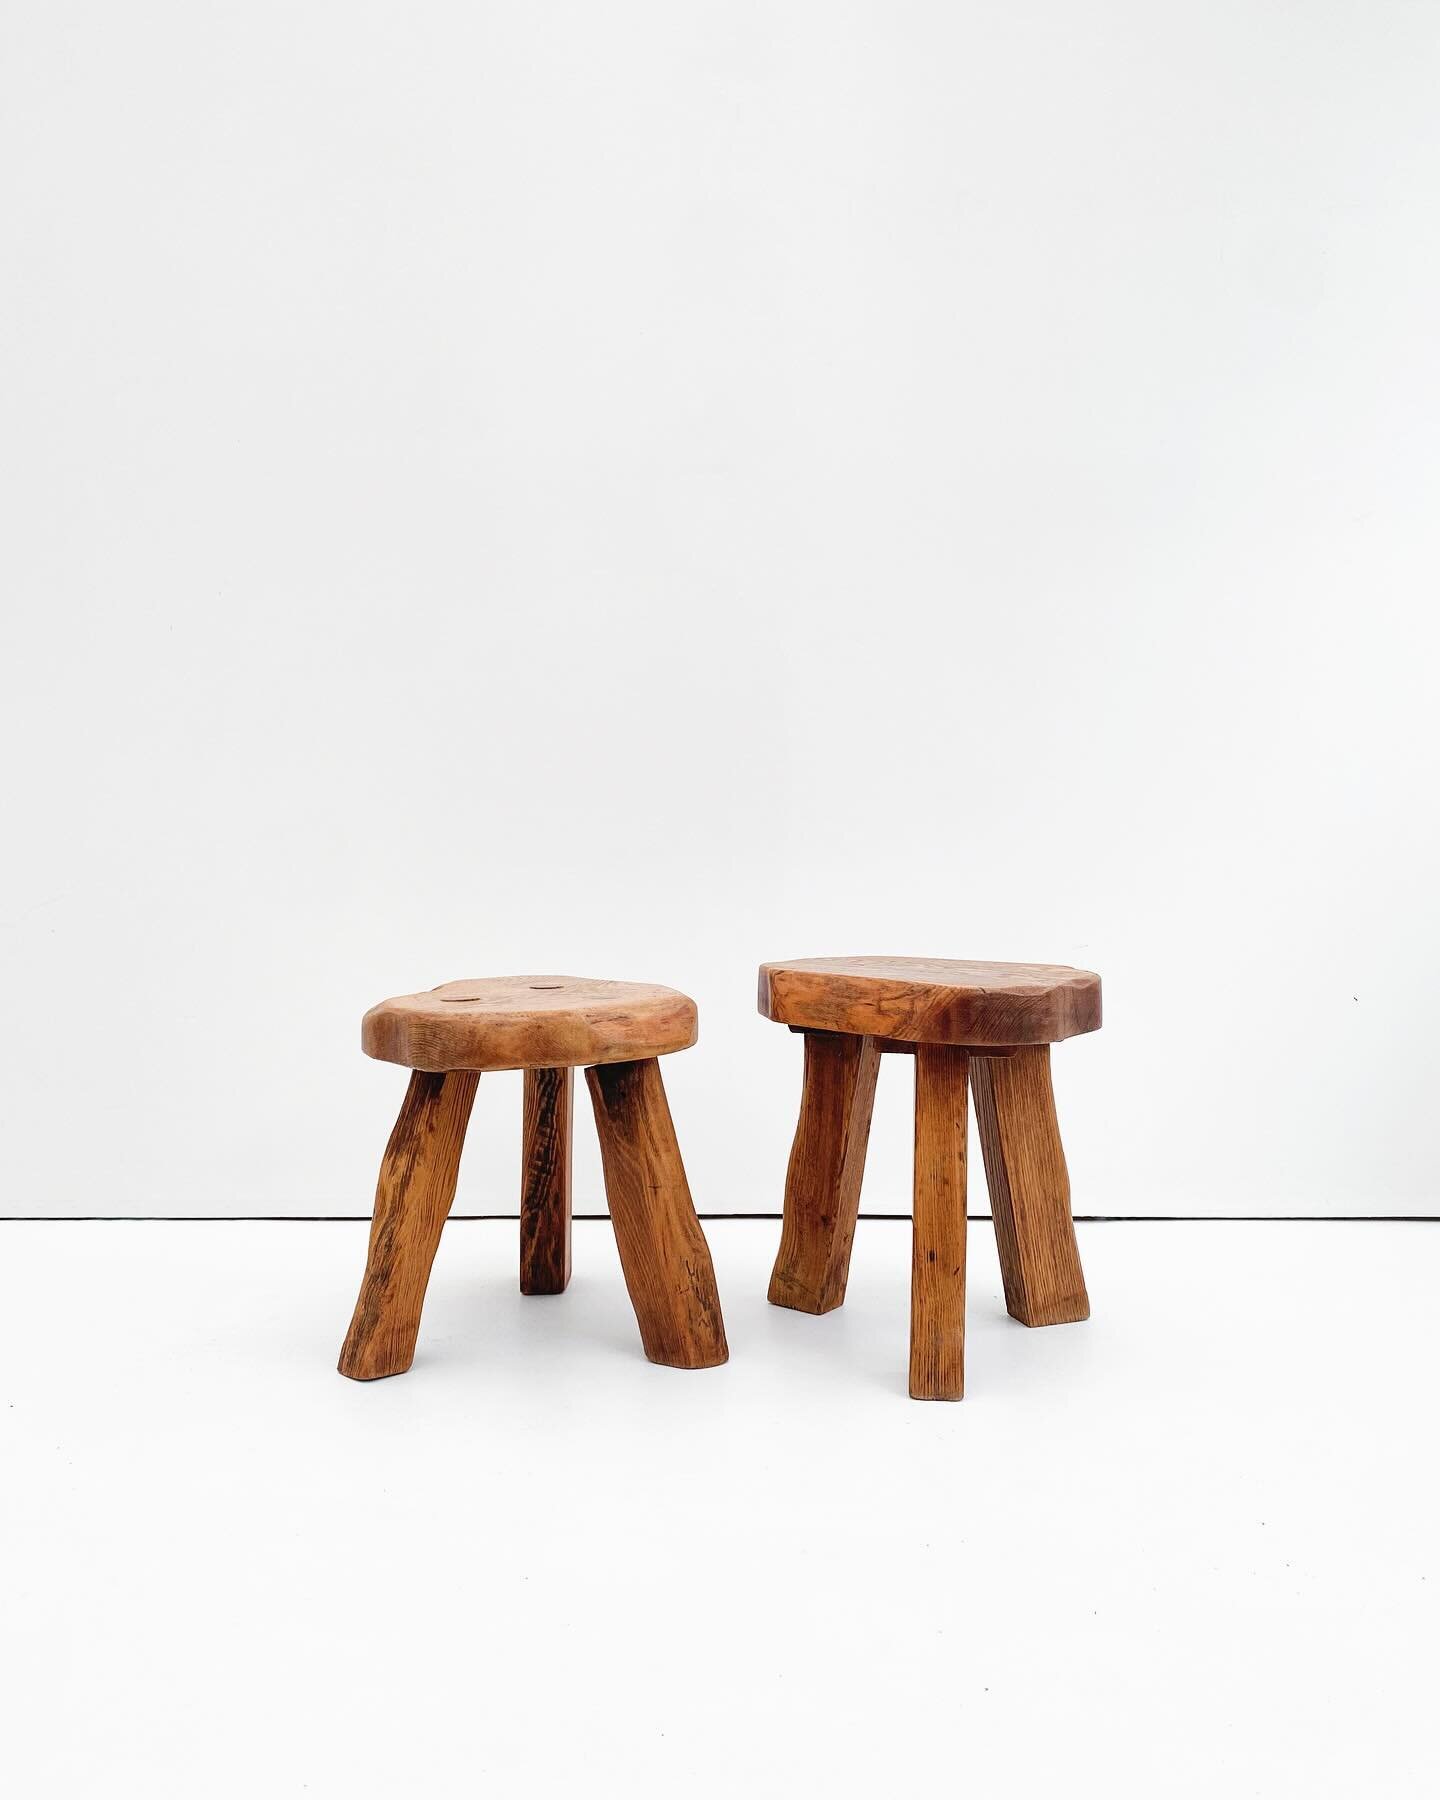 A pair of &lsquo;Wanderwood&rsquo; solid wood milking stools of French origin, each featuring a thick, hand carved seat sitting on three splayed legs.

Available online | DM for details

#artsandcrafts #elm #naive #stool #wanderwood  #haussmith